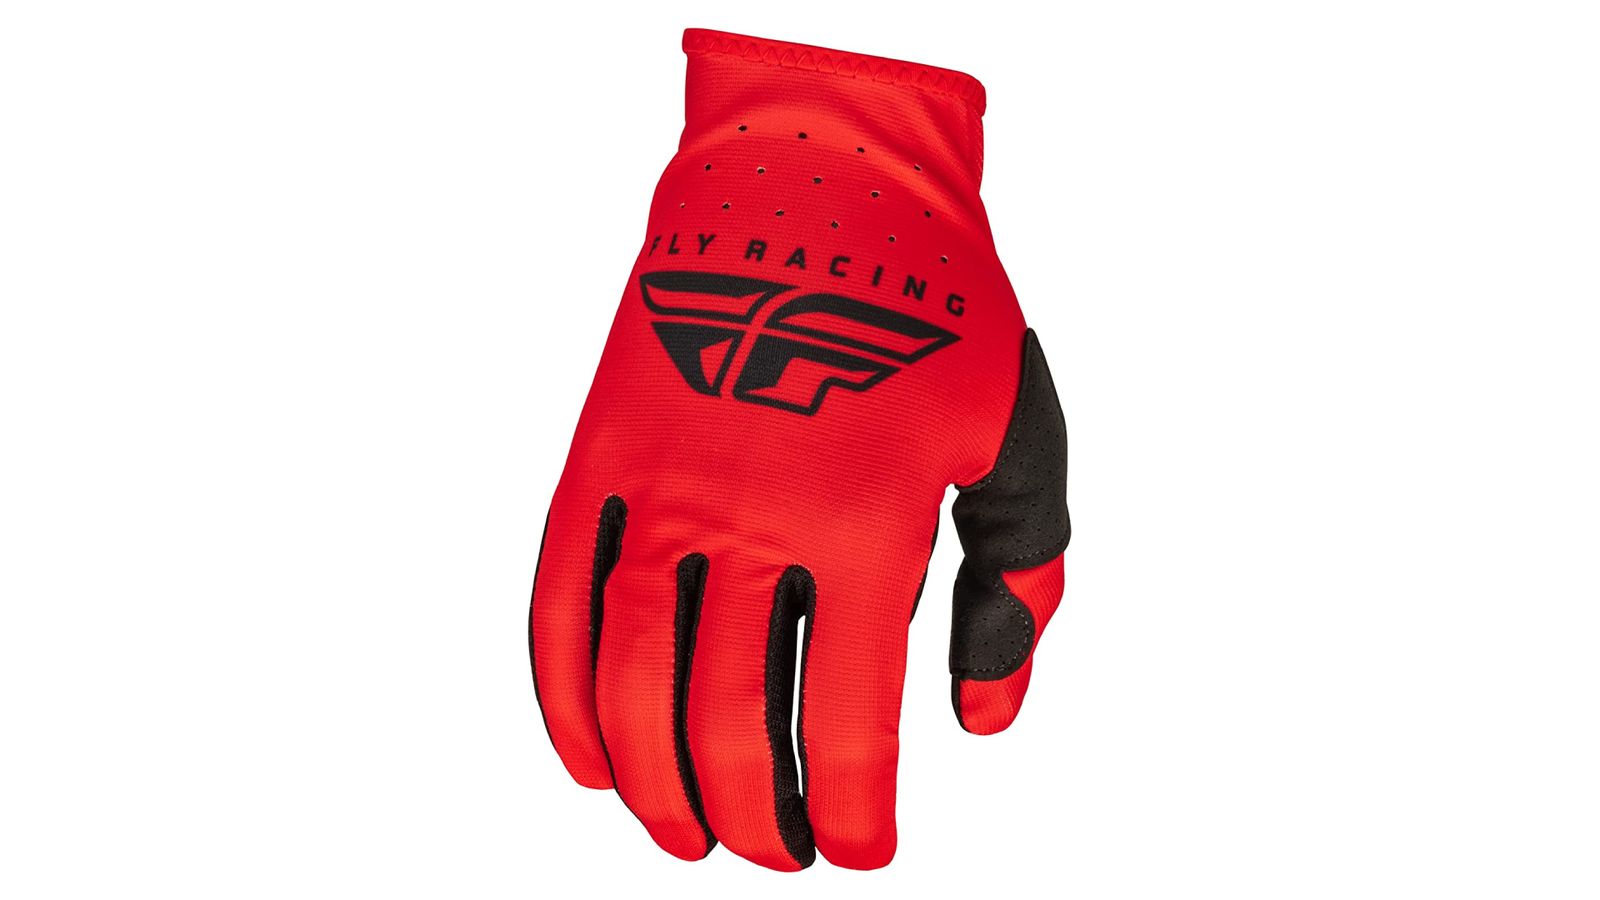 Fly Racing Lite Gloves product image of a red and black lightweight glove.